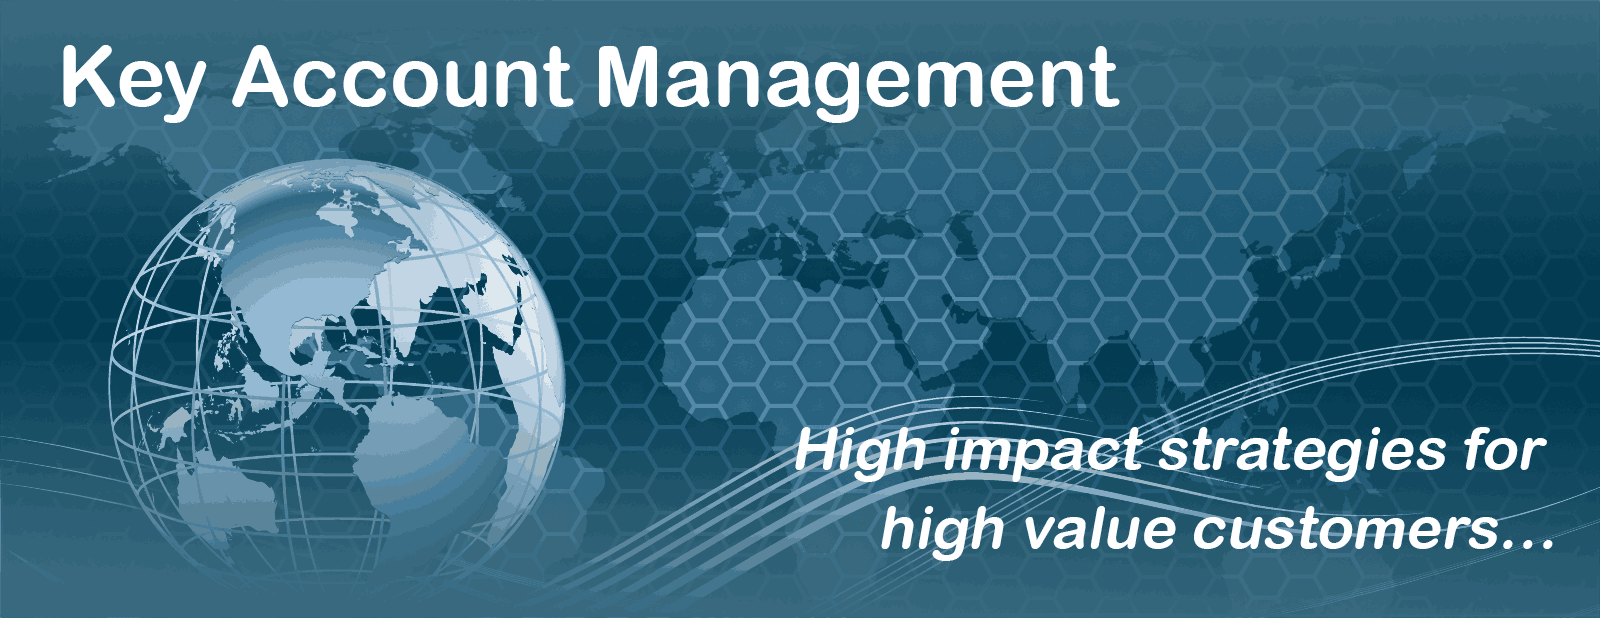 Key Account Management - High impact strategies for high value customers